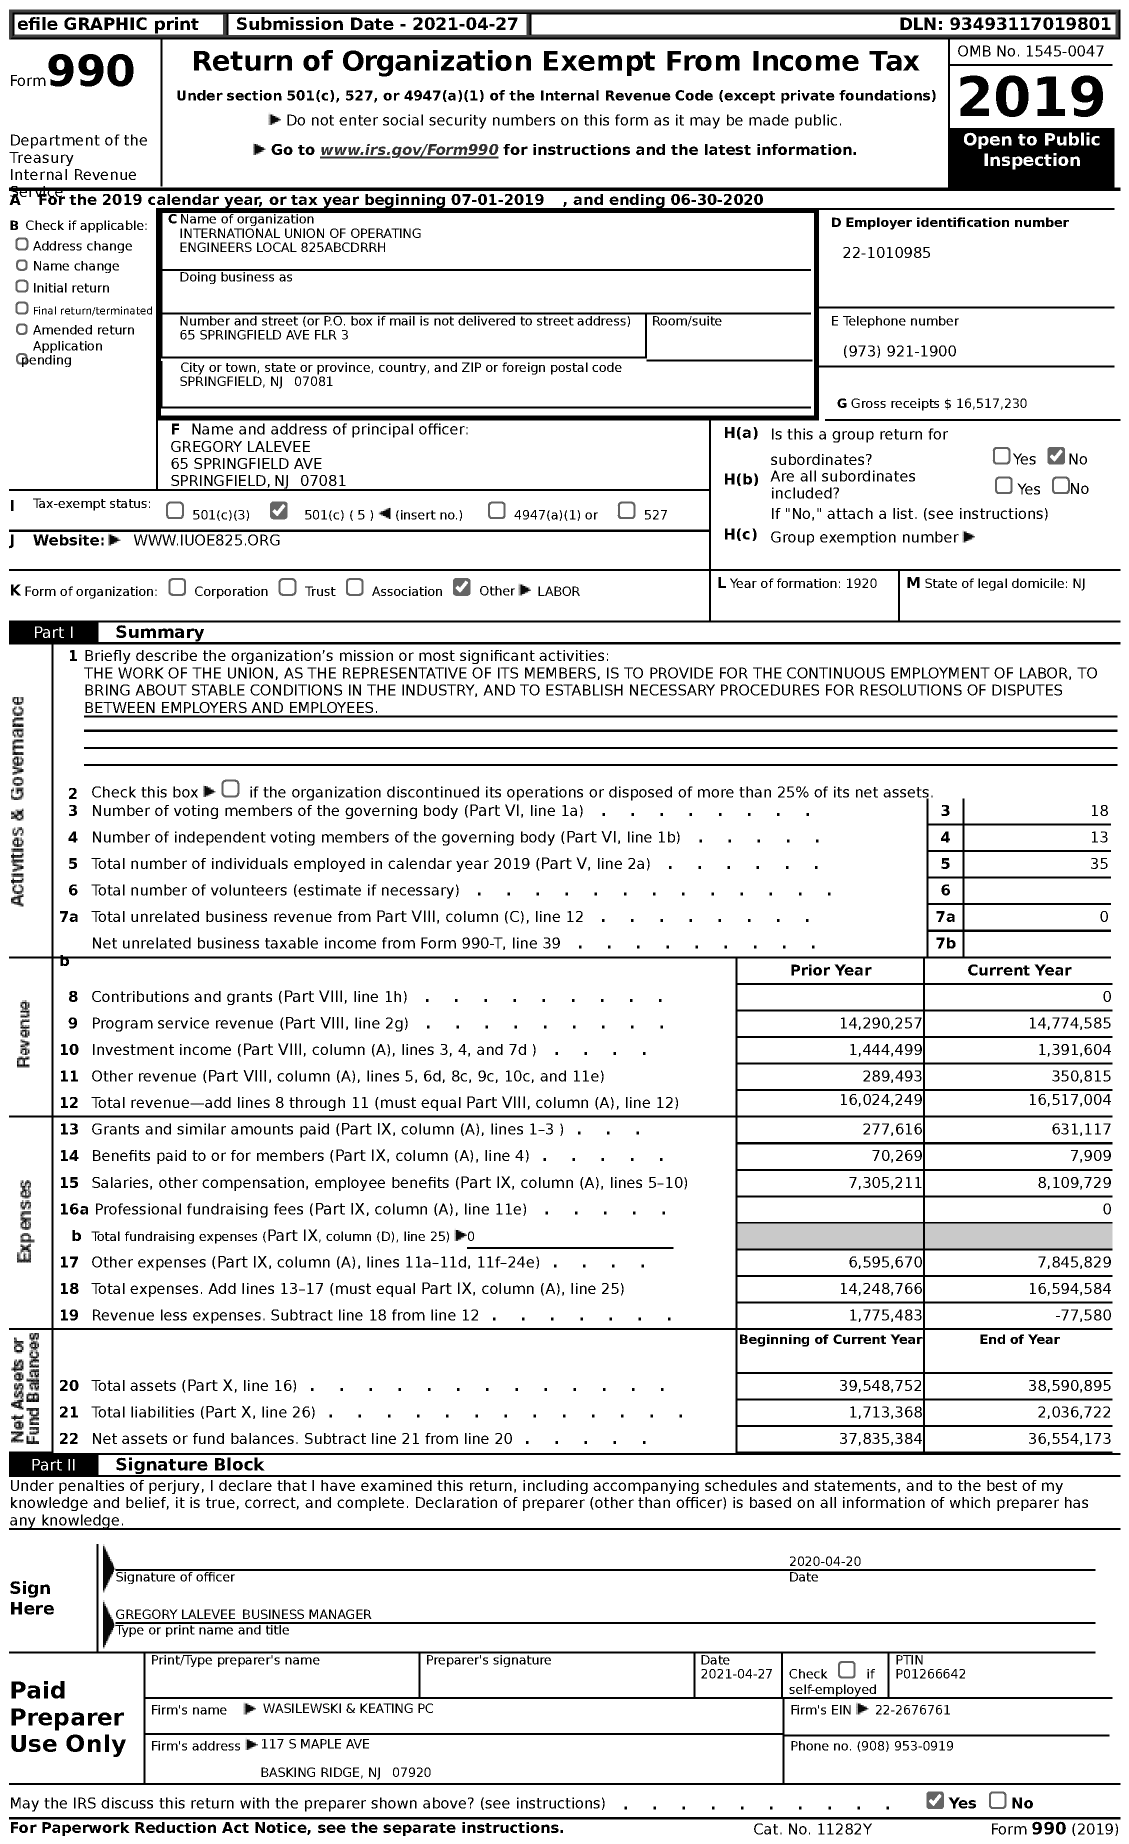 Image of first page of 2019 Form 990 for International Union of Operating Engineers Local 825abcdrrh (IUOE825)